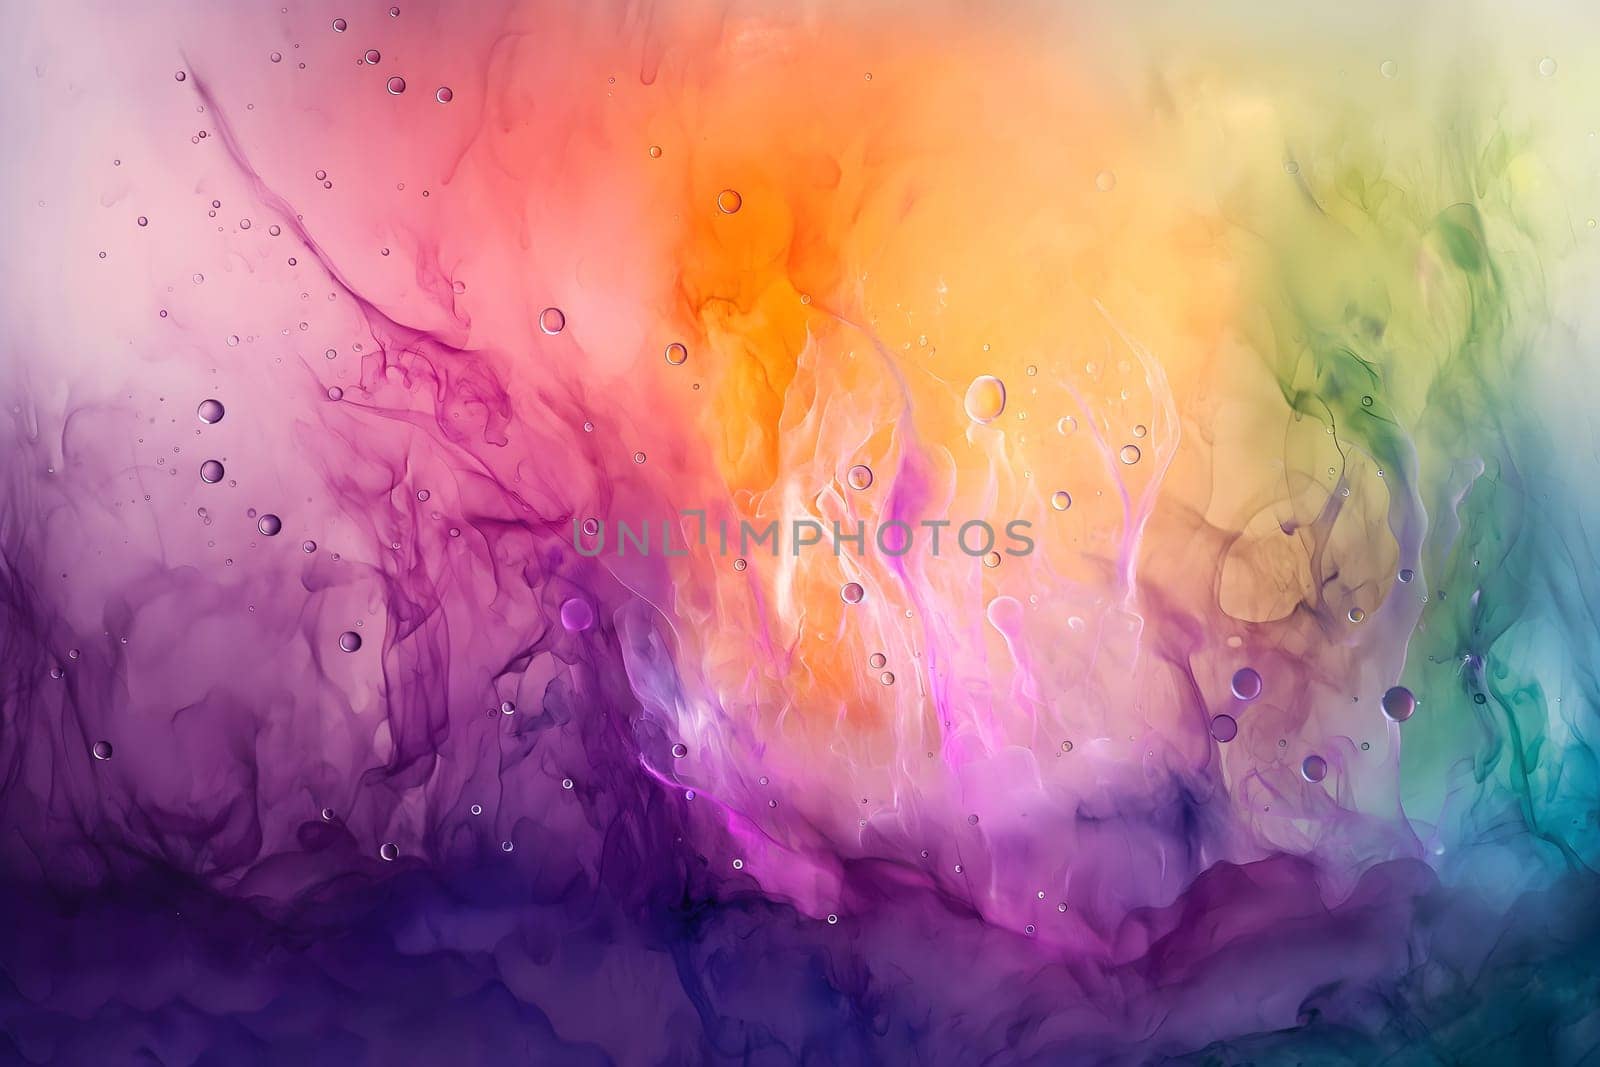 Abstract art of vibrant and colorful liquid with bubbles creating a serene background with artistic appeal for creative design use.